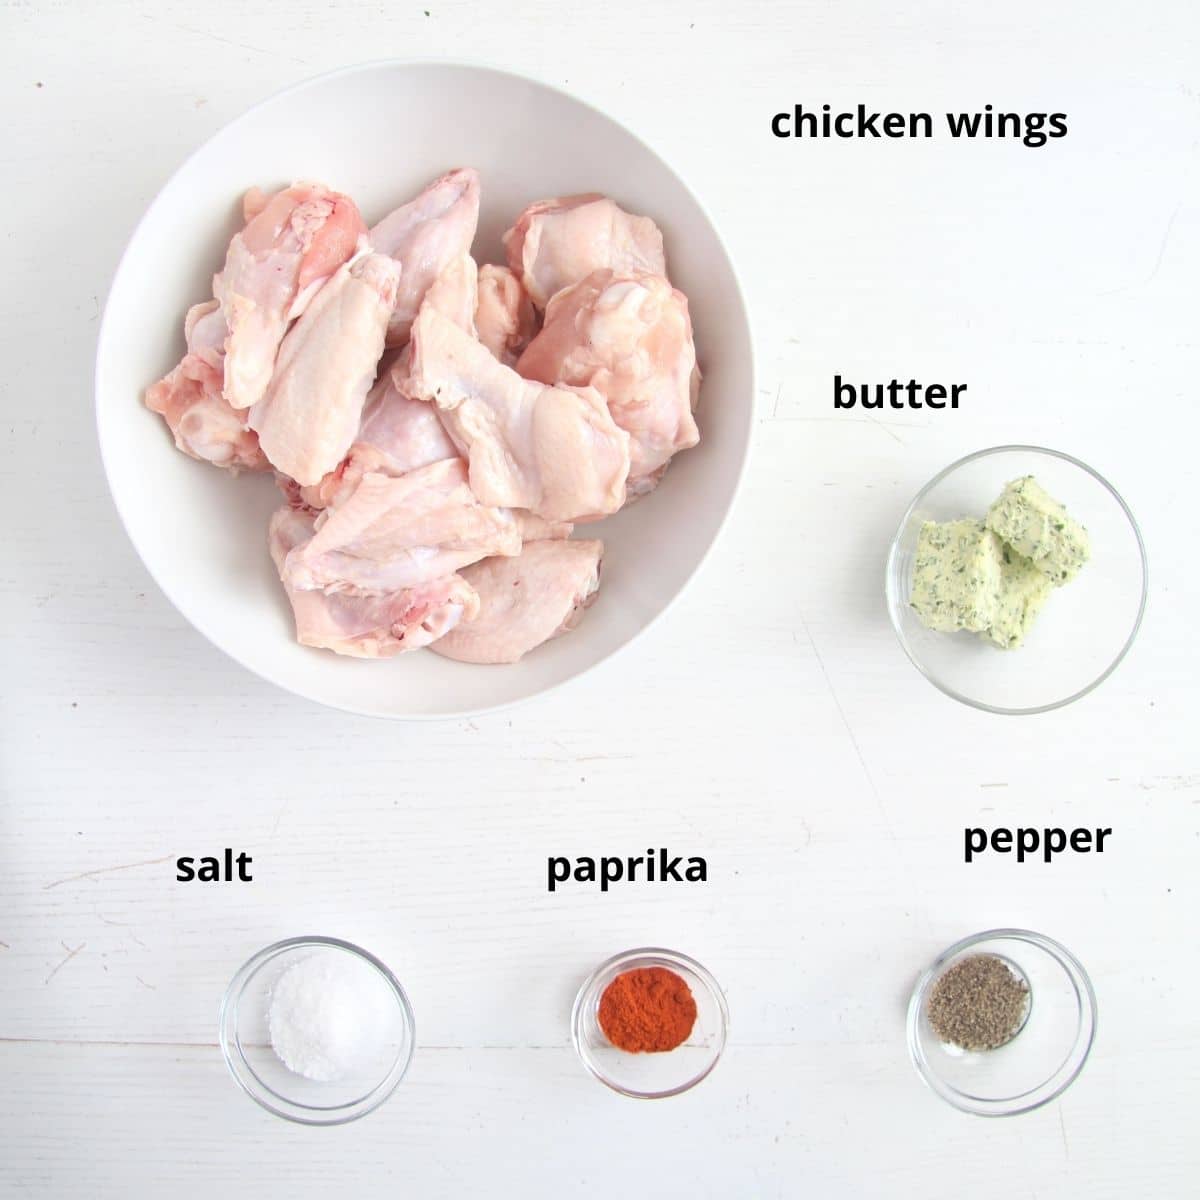 listed ingredients for making chicken wings with herb butter.